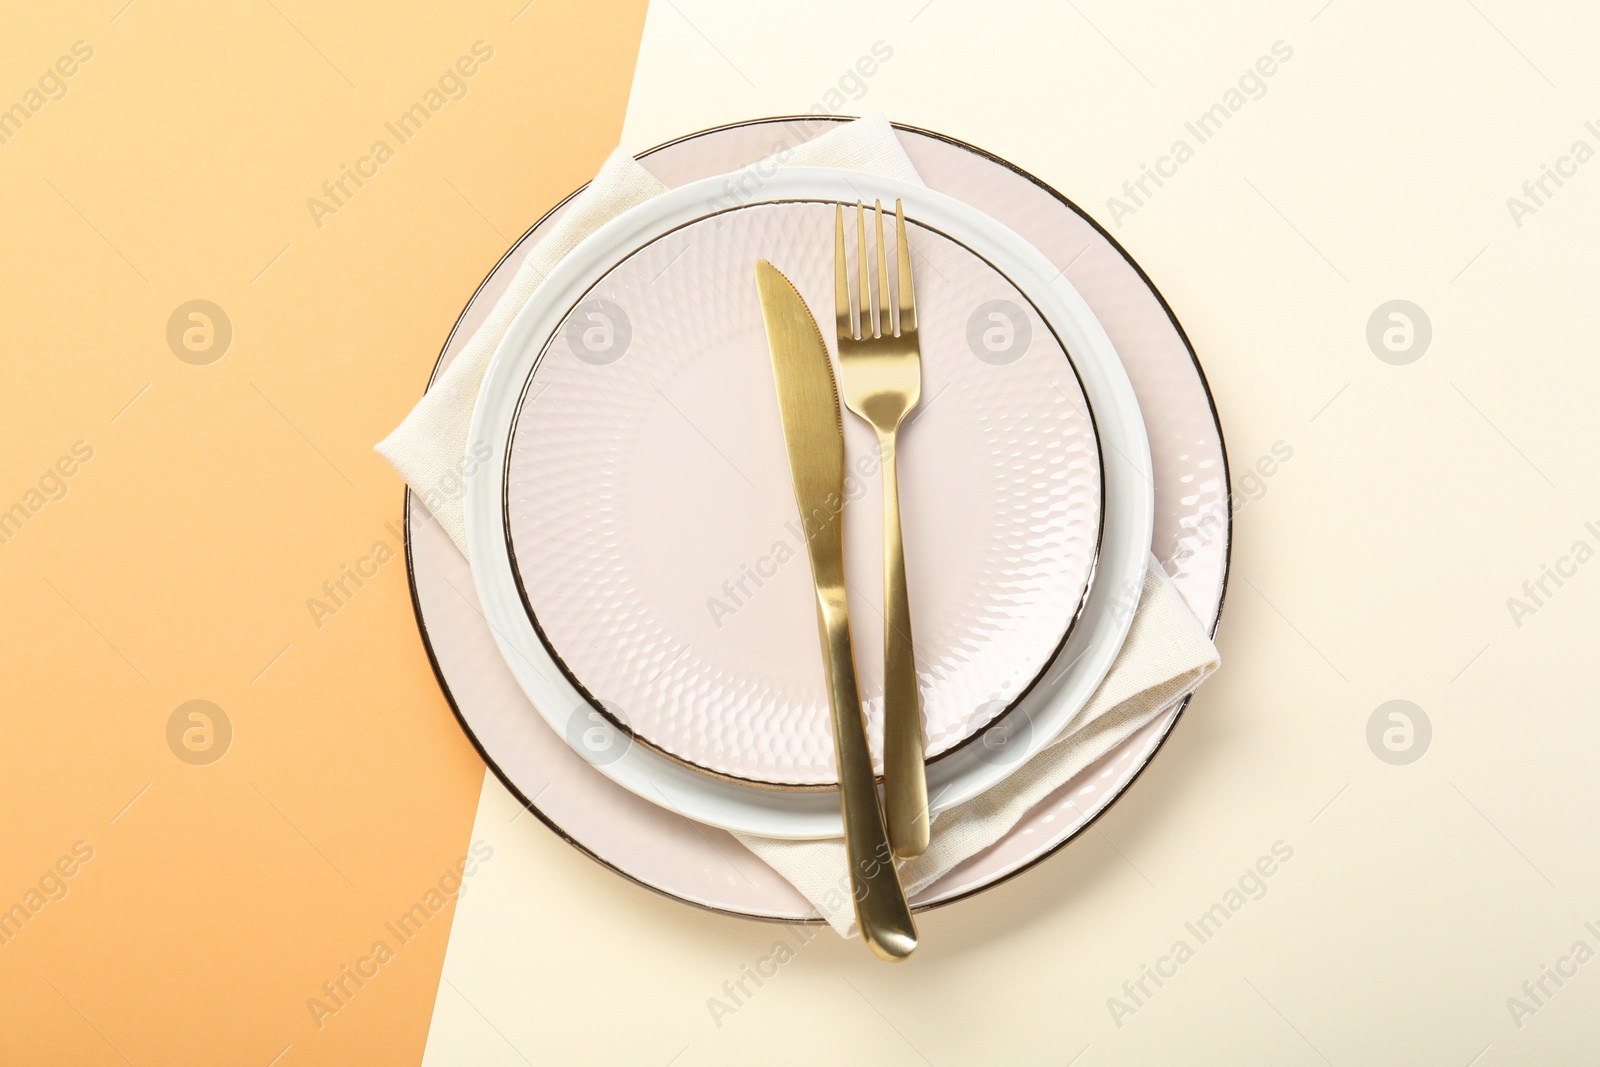 Photo of Ceramic plates, cutlery and napkin on color background, top view